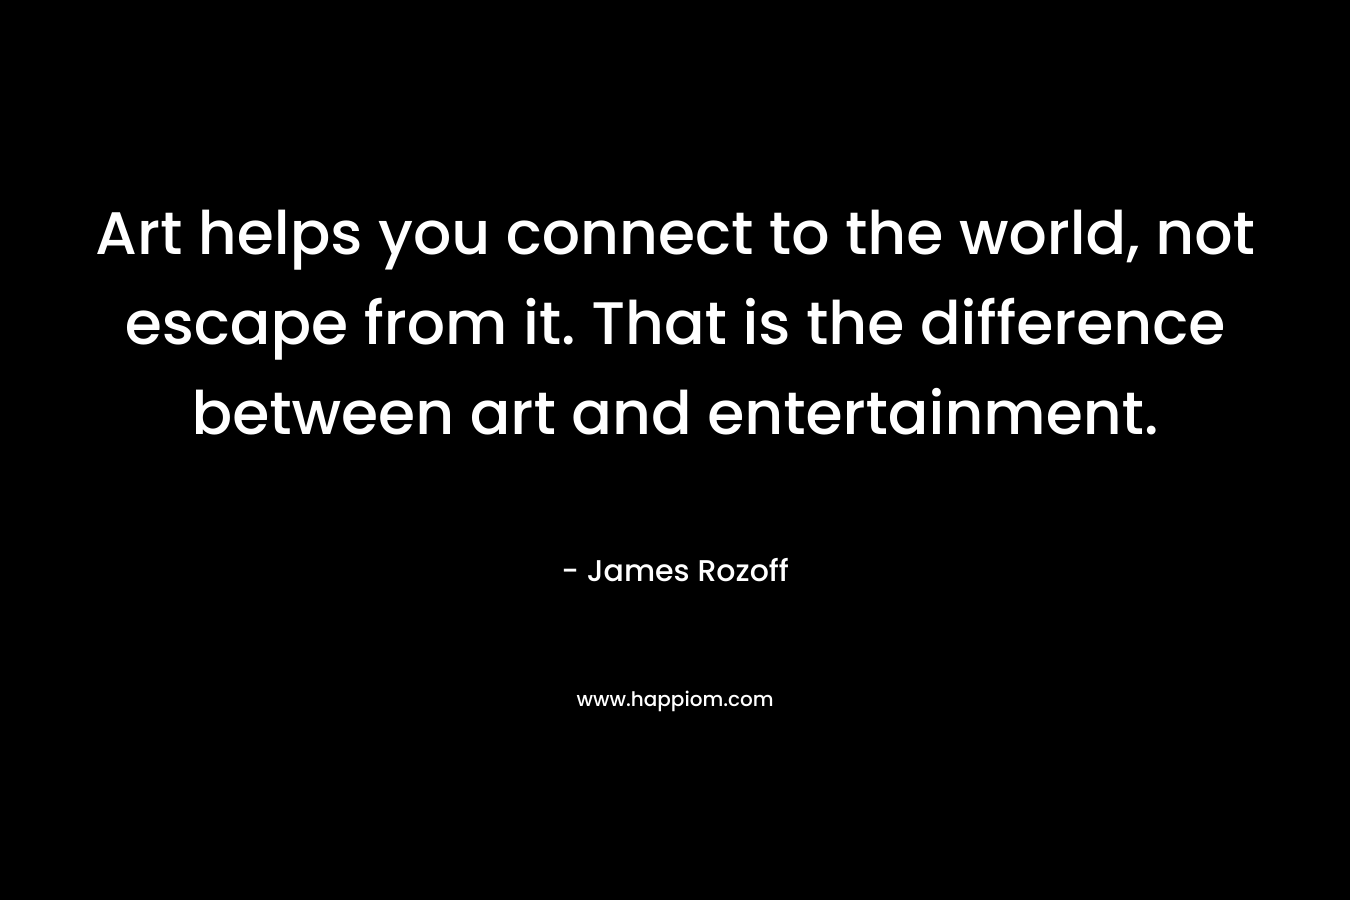 Art helps you connect to the world, not escape from it. That is the difference between art and entertainment.